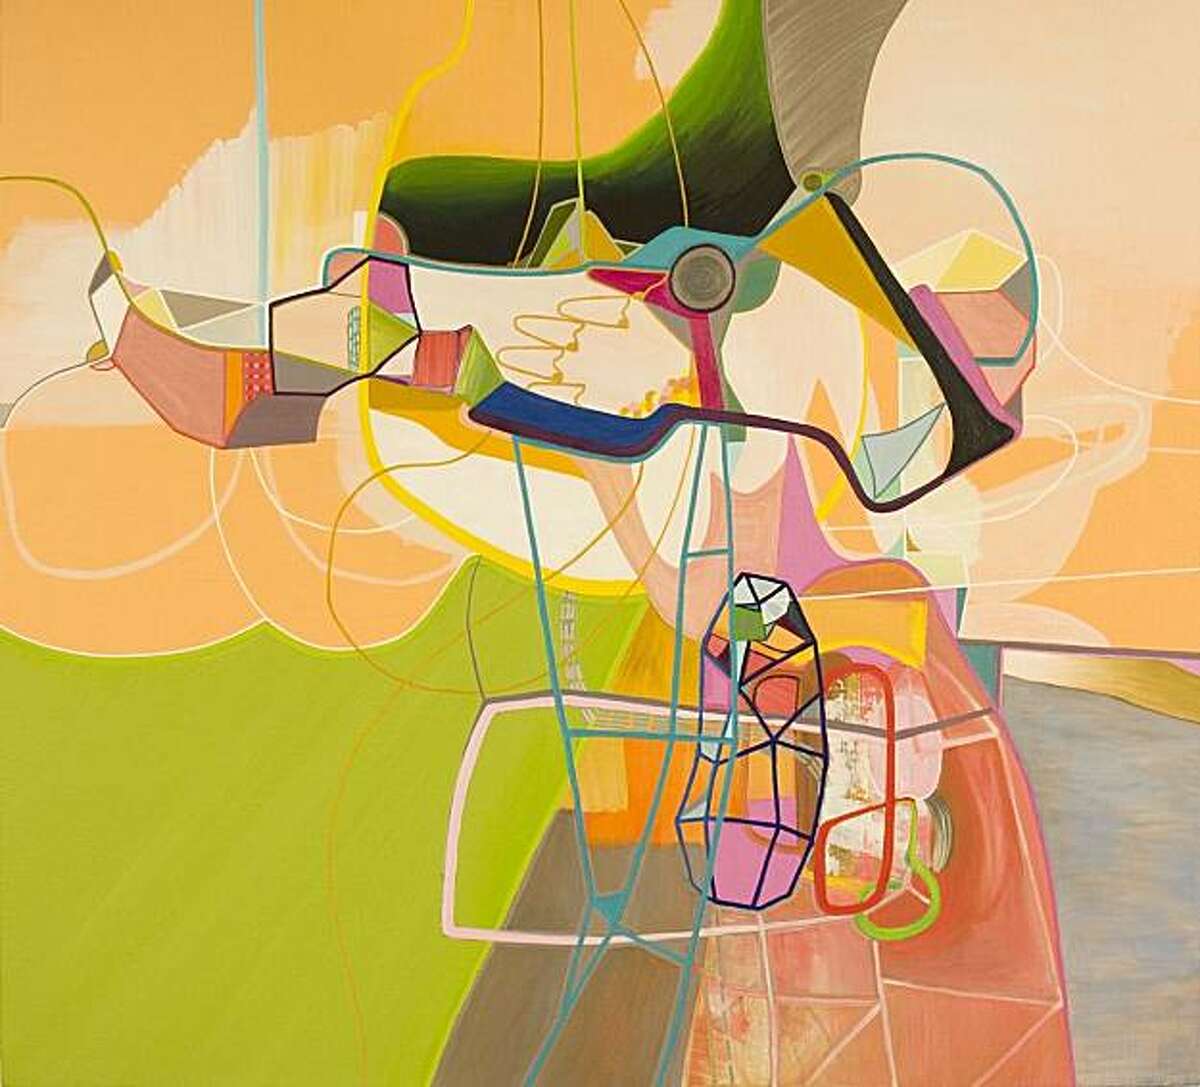 "Architecture's Internal Logic" (2008) acrylic and oil on canvas by Jessica Snow 38" x 42"